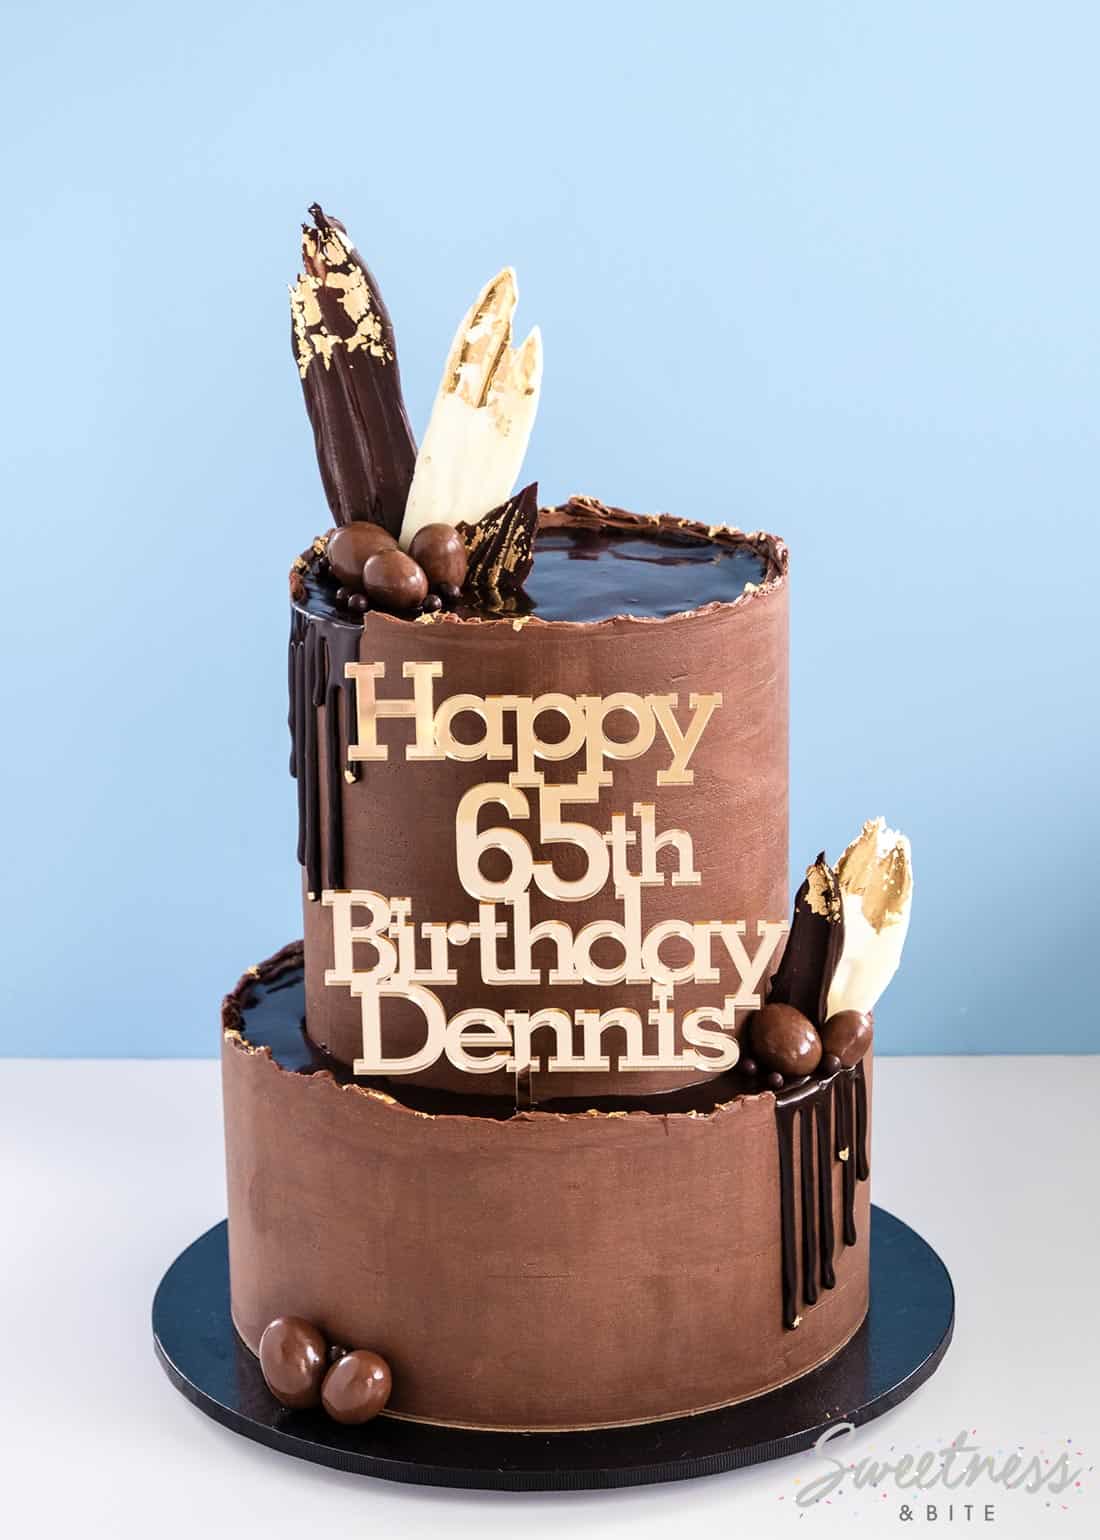 A two tier chocolate ganache covered cake with ganache drips and a gold happy birthday cake topper.